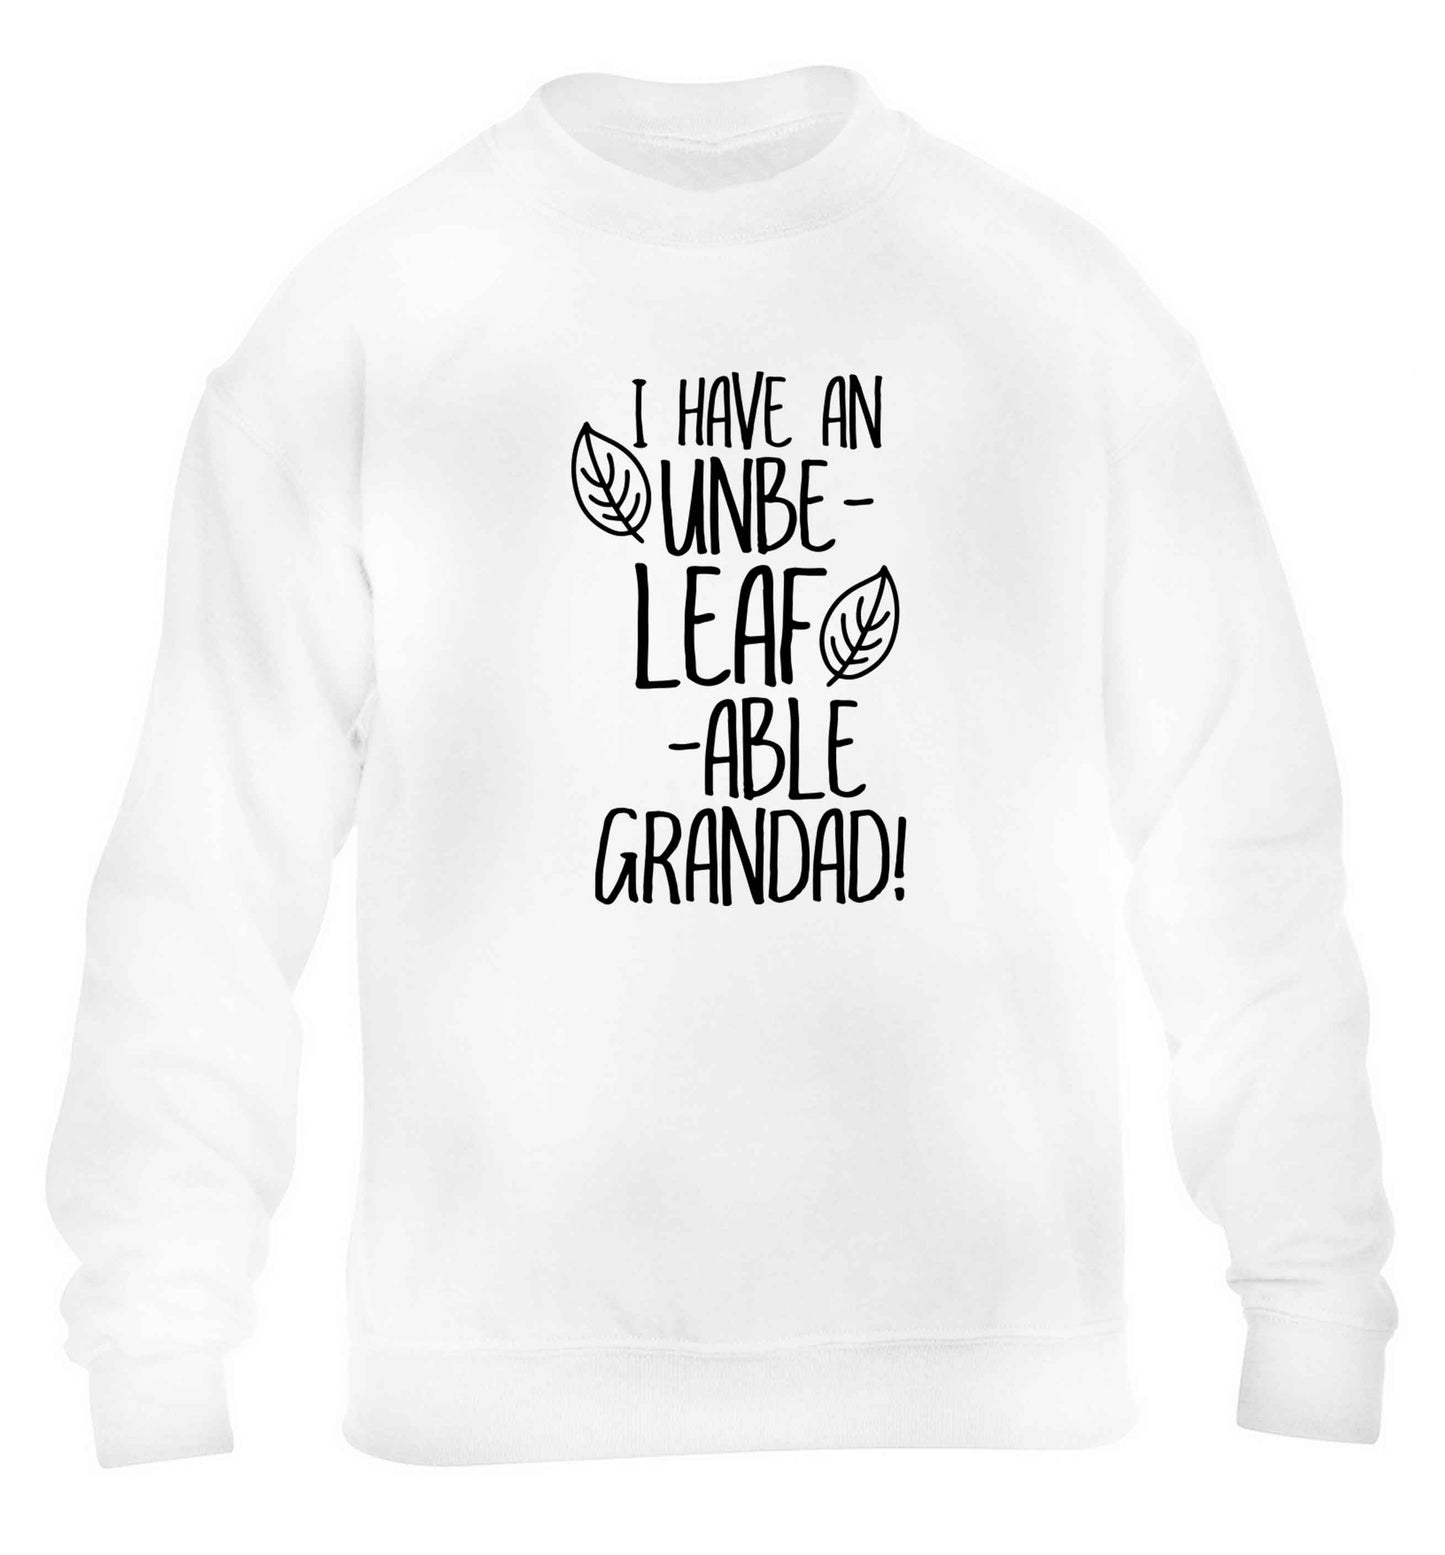 I have an unbe-leaf-able grandad children's white sweater 12-13 Years